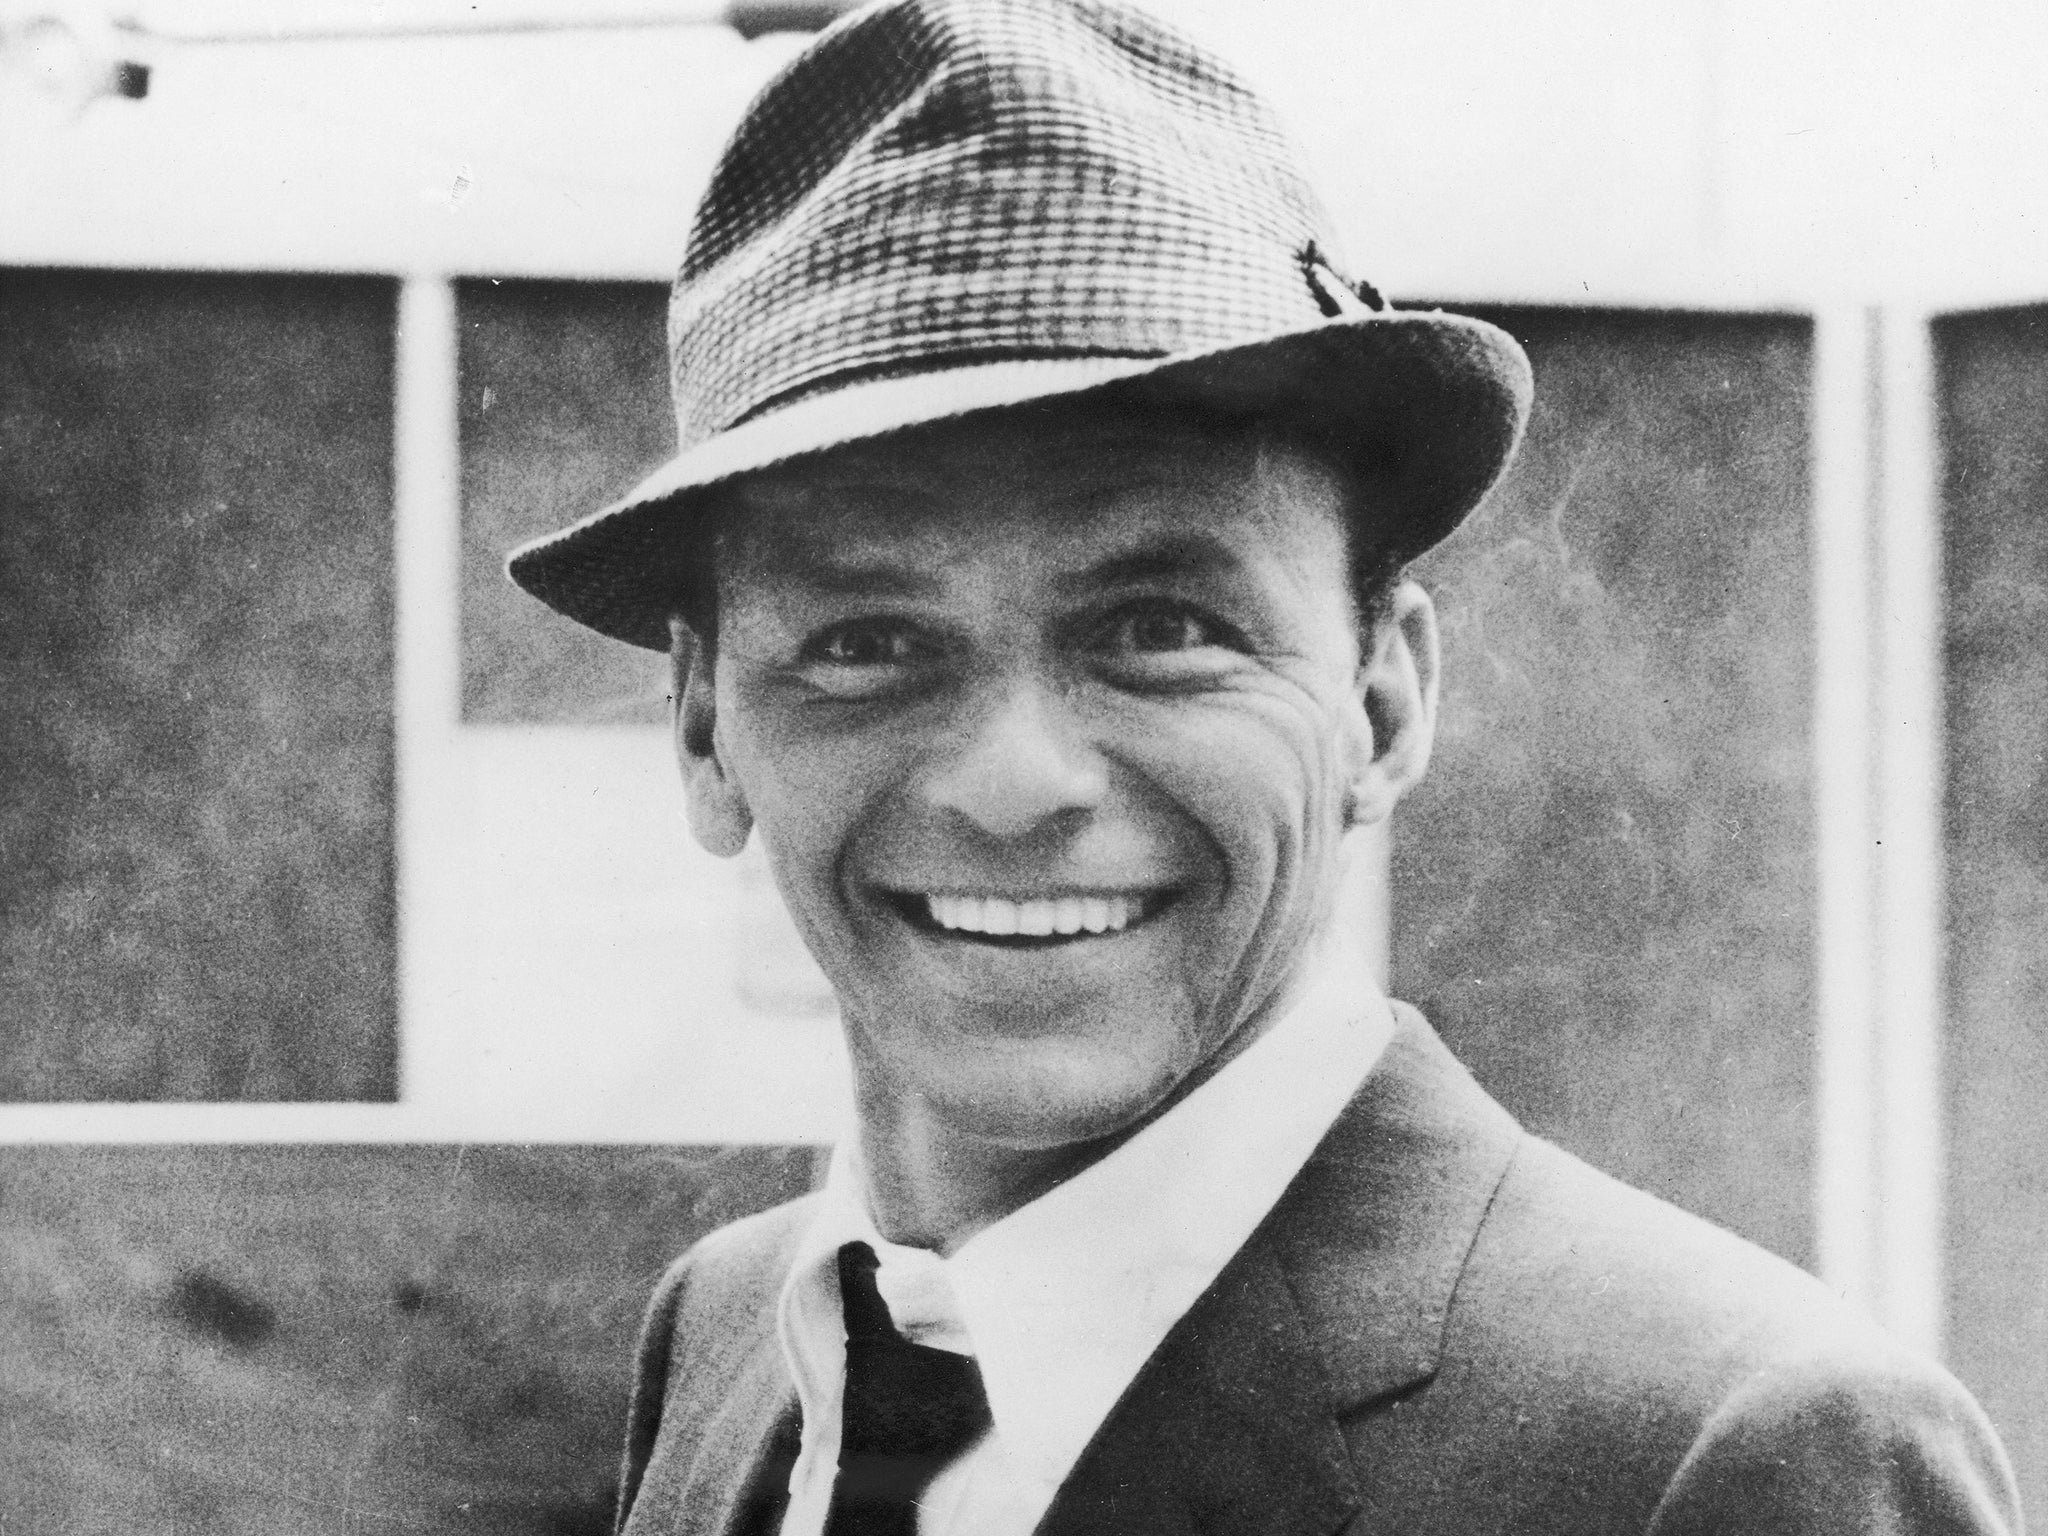 The video is part of a collection of Sinatra performances featured on an upcoming box set of his tours around the world